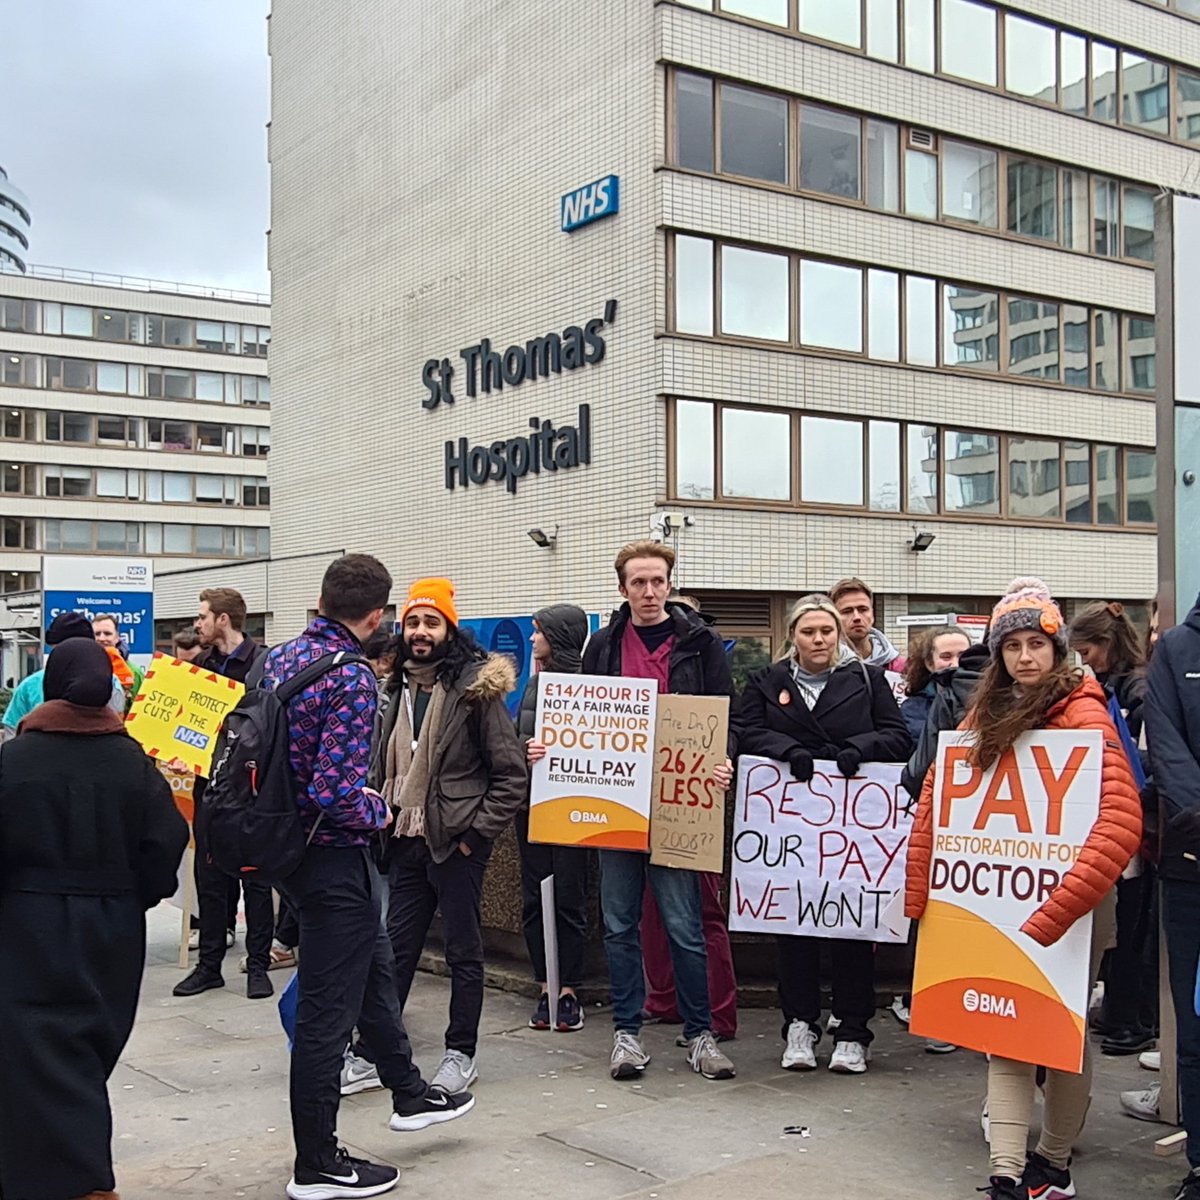 Junior Doctors in England are taking strike action to restore pay. Under the Conservatives they graduate with up to £100k debt but their real pay has been falling for a decade. I trust Junior Doctors. I'm backing them. #JuniorDoctorsStrike #SOSNHS